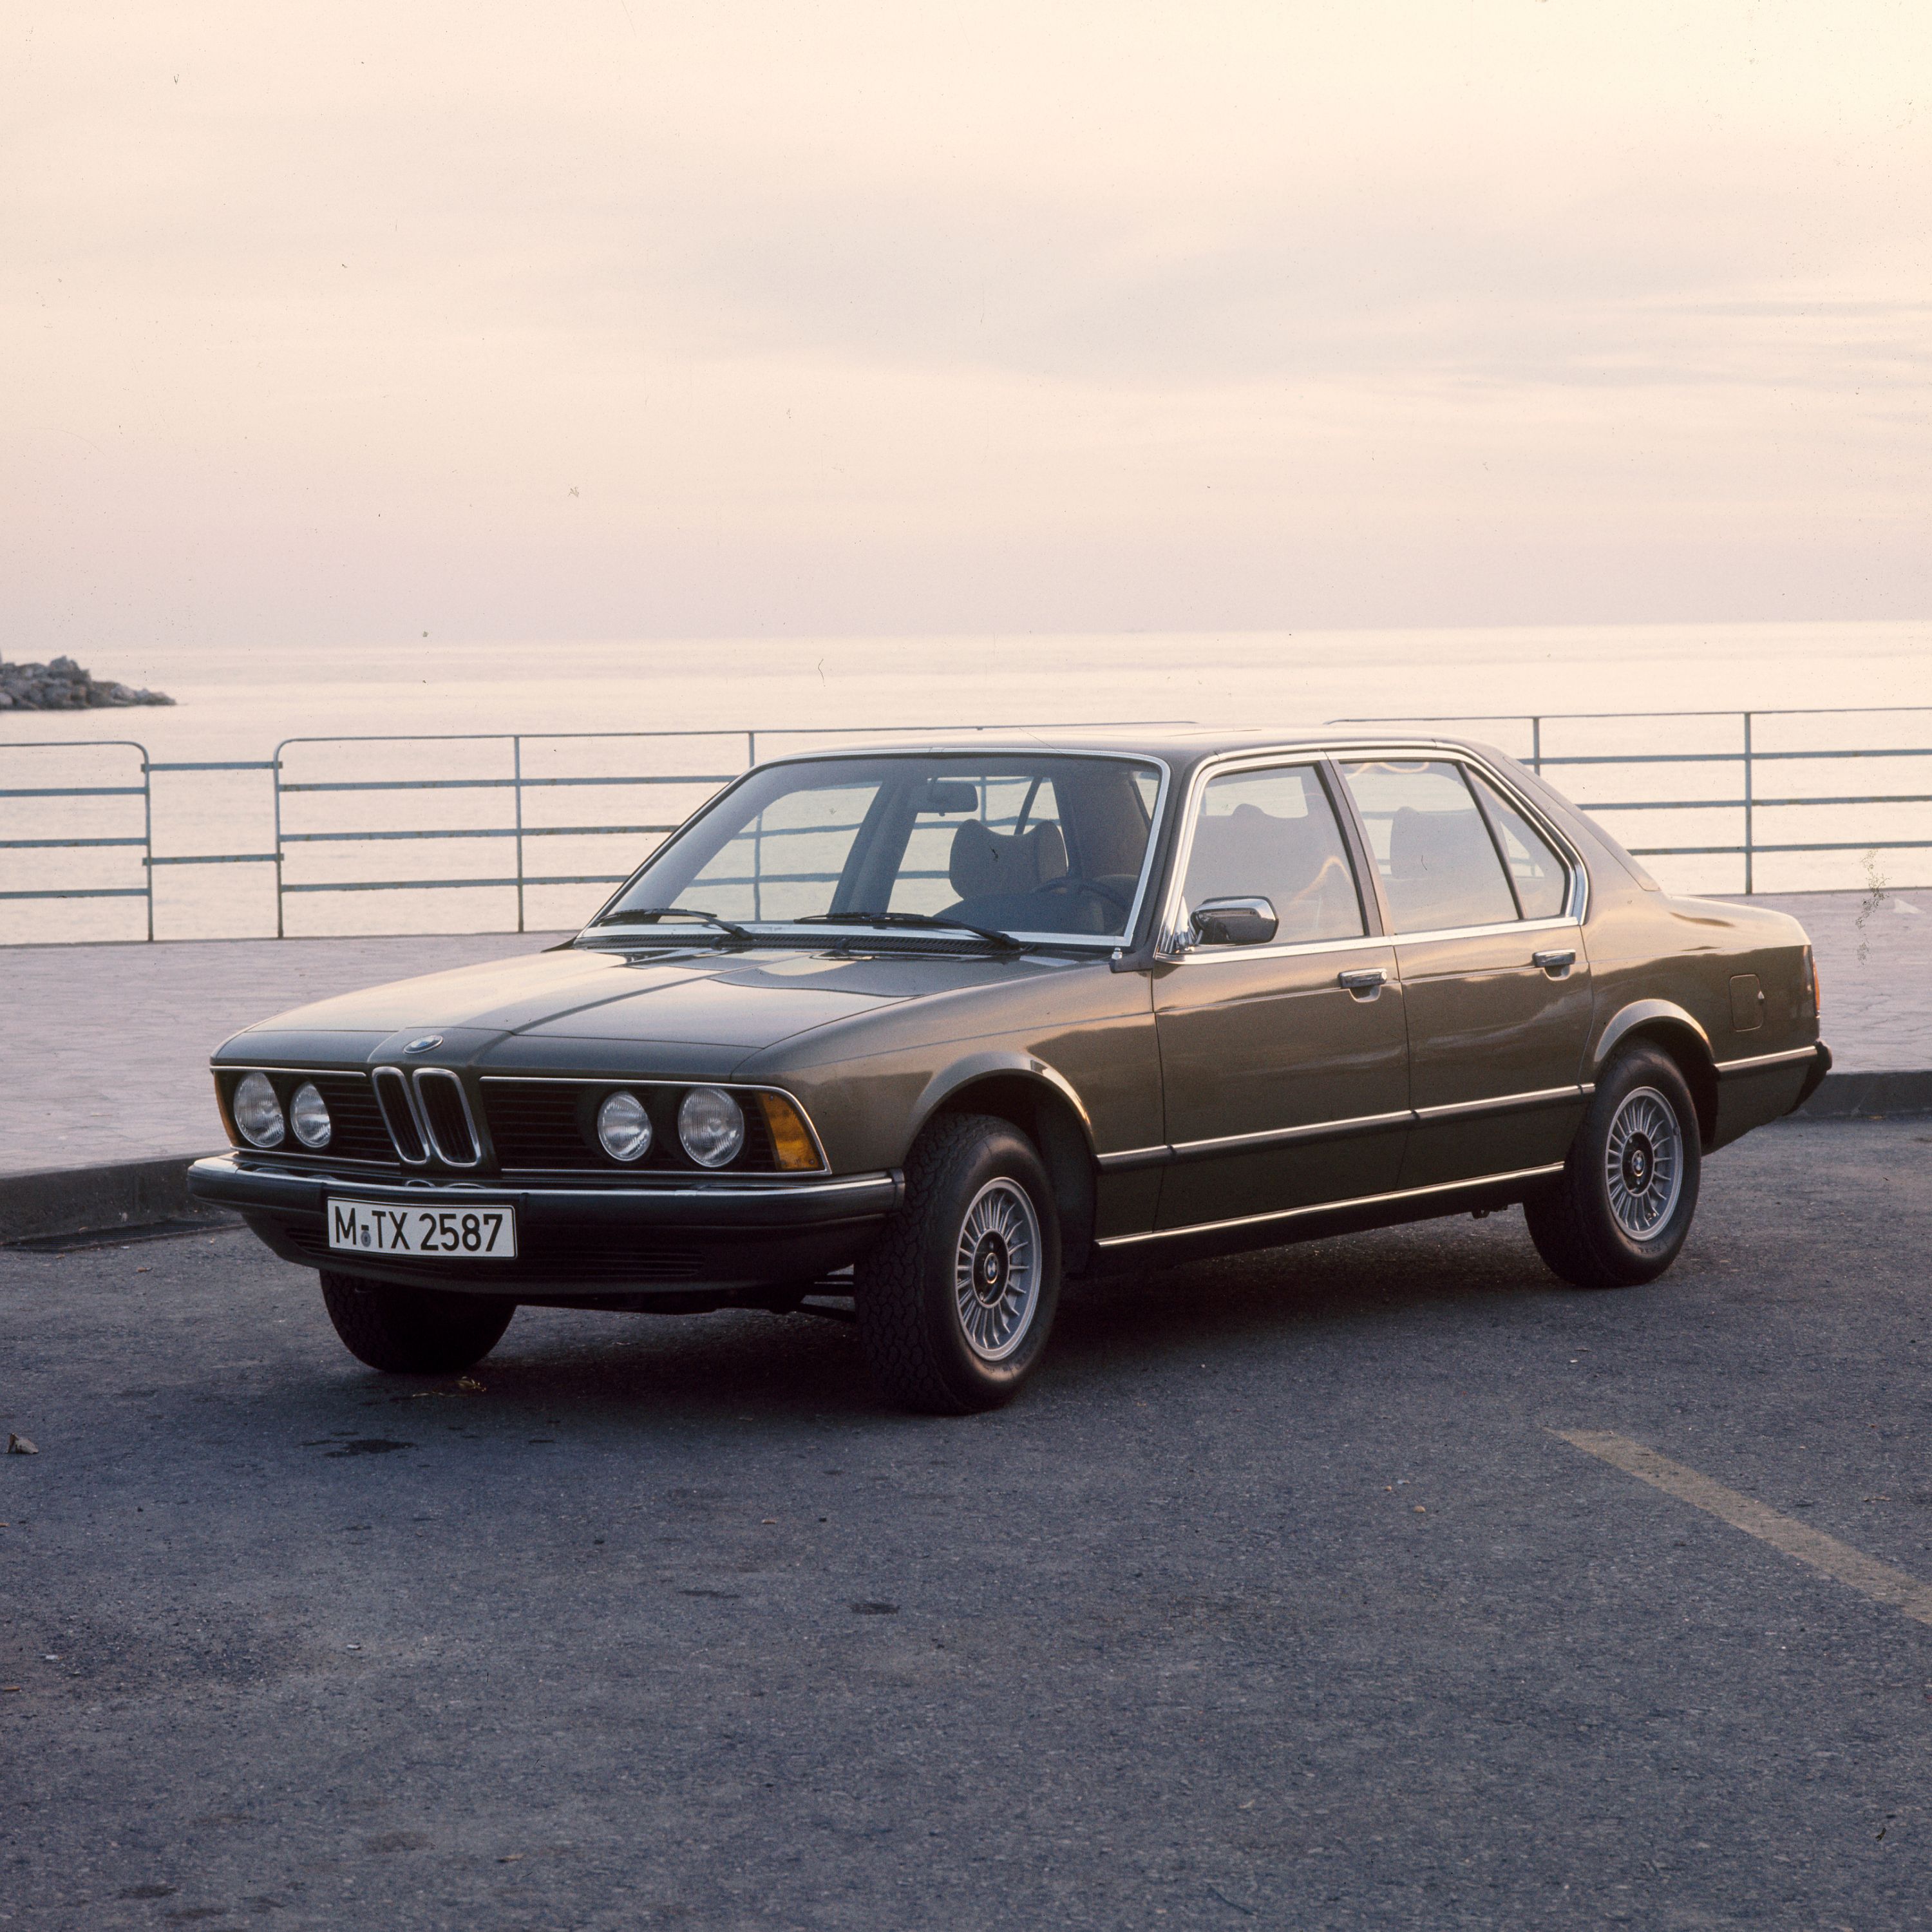 BMW 7 Series Sedan E23 parked in front of the sea with a stone pier in the background